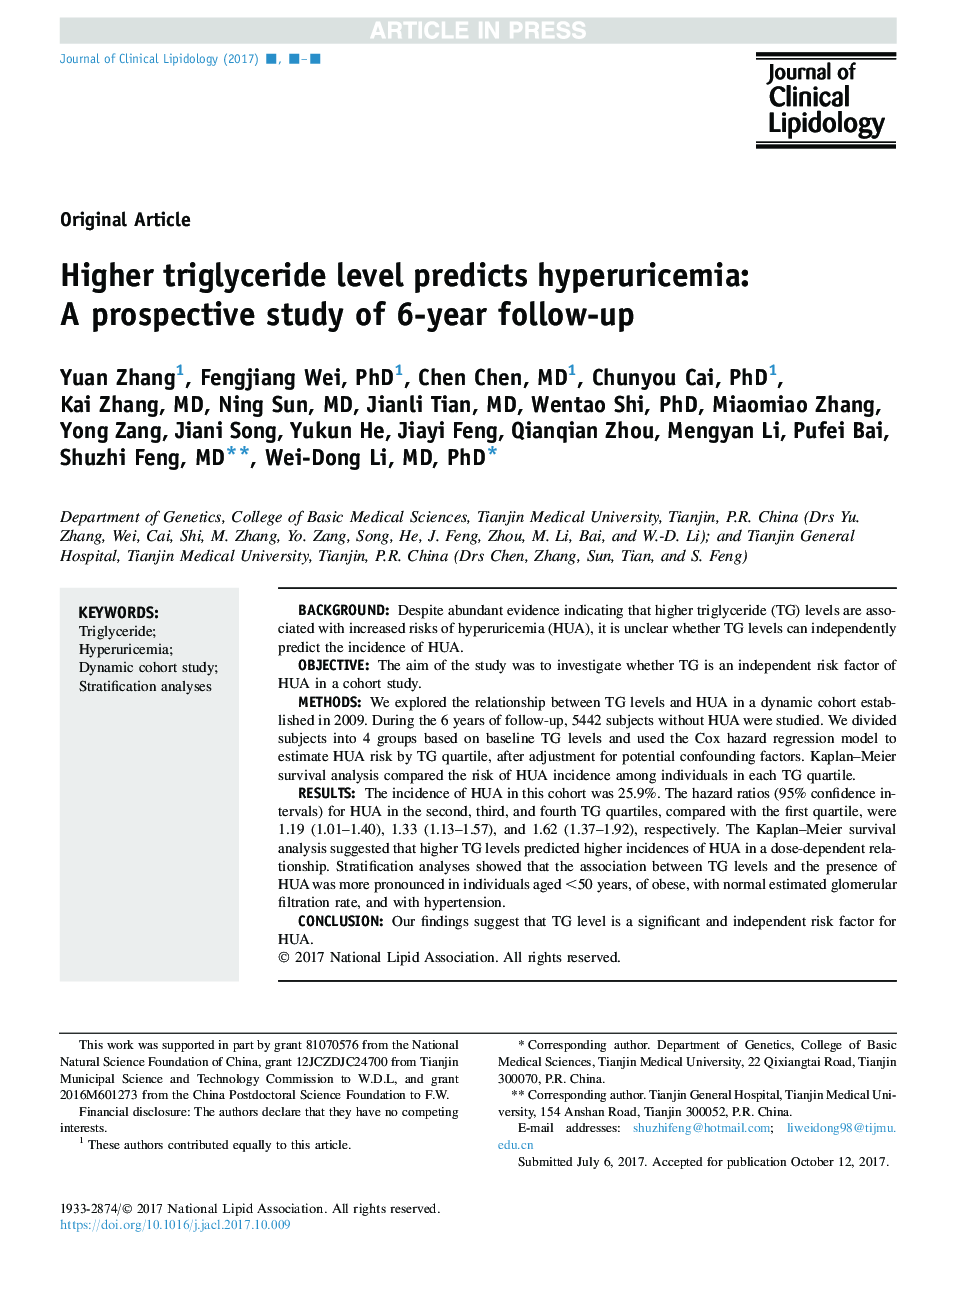 Higher triglyceride level predicts hyperuricemia: A prospective study of 6-year follow-up